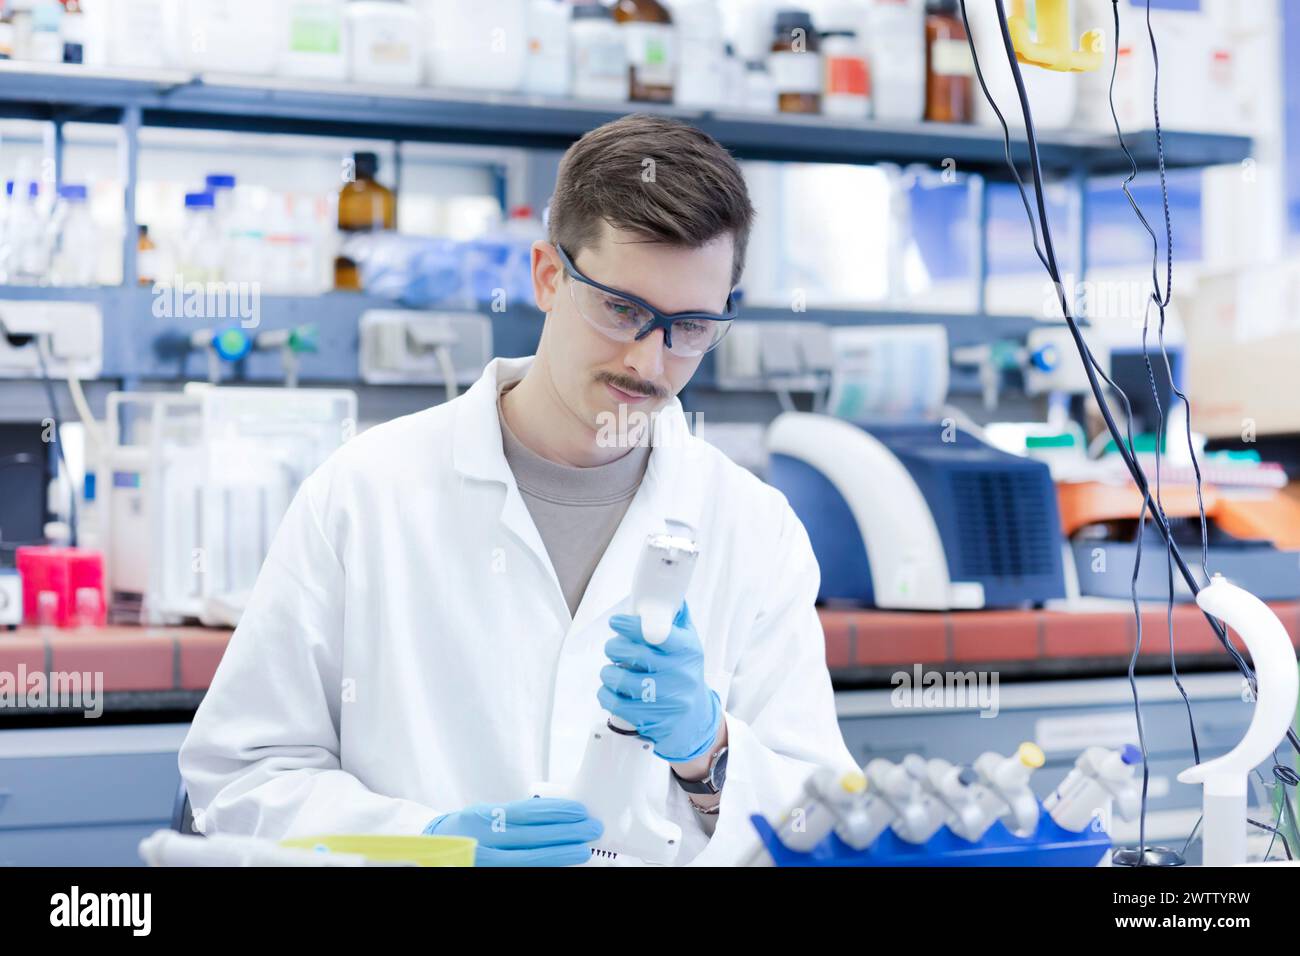 Scientist examining a test tube in a laboratory setting. Stock Photo